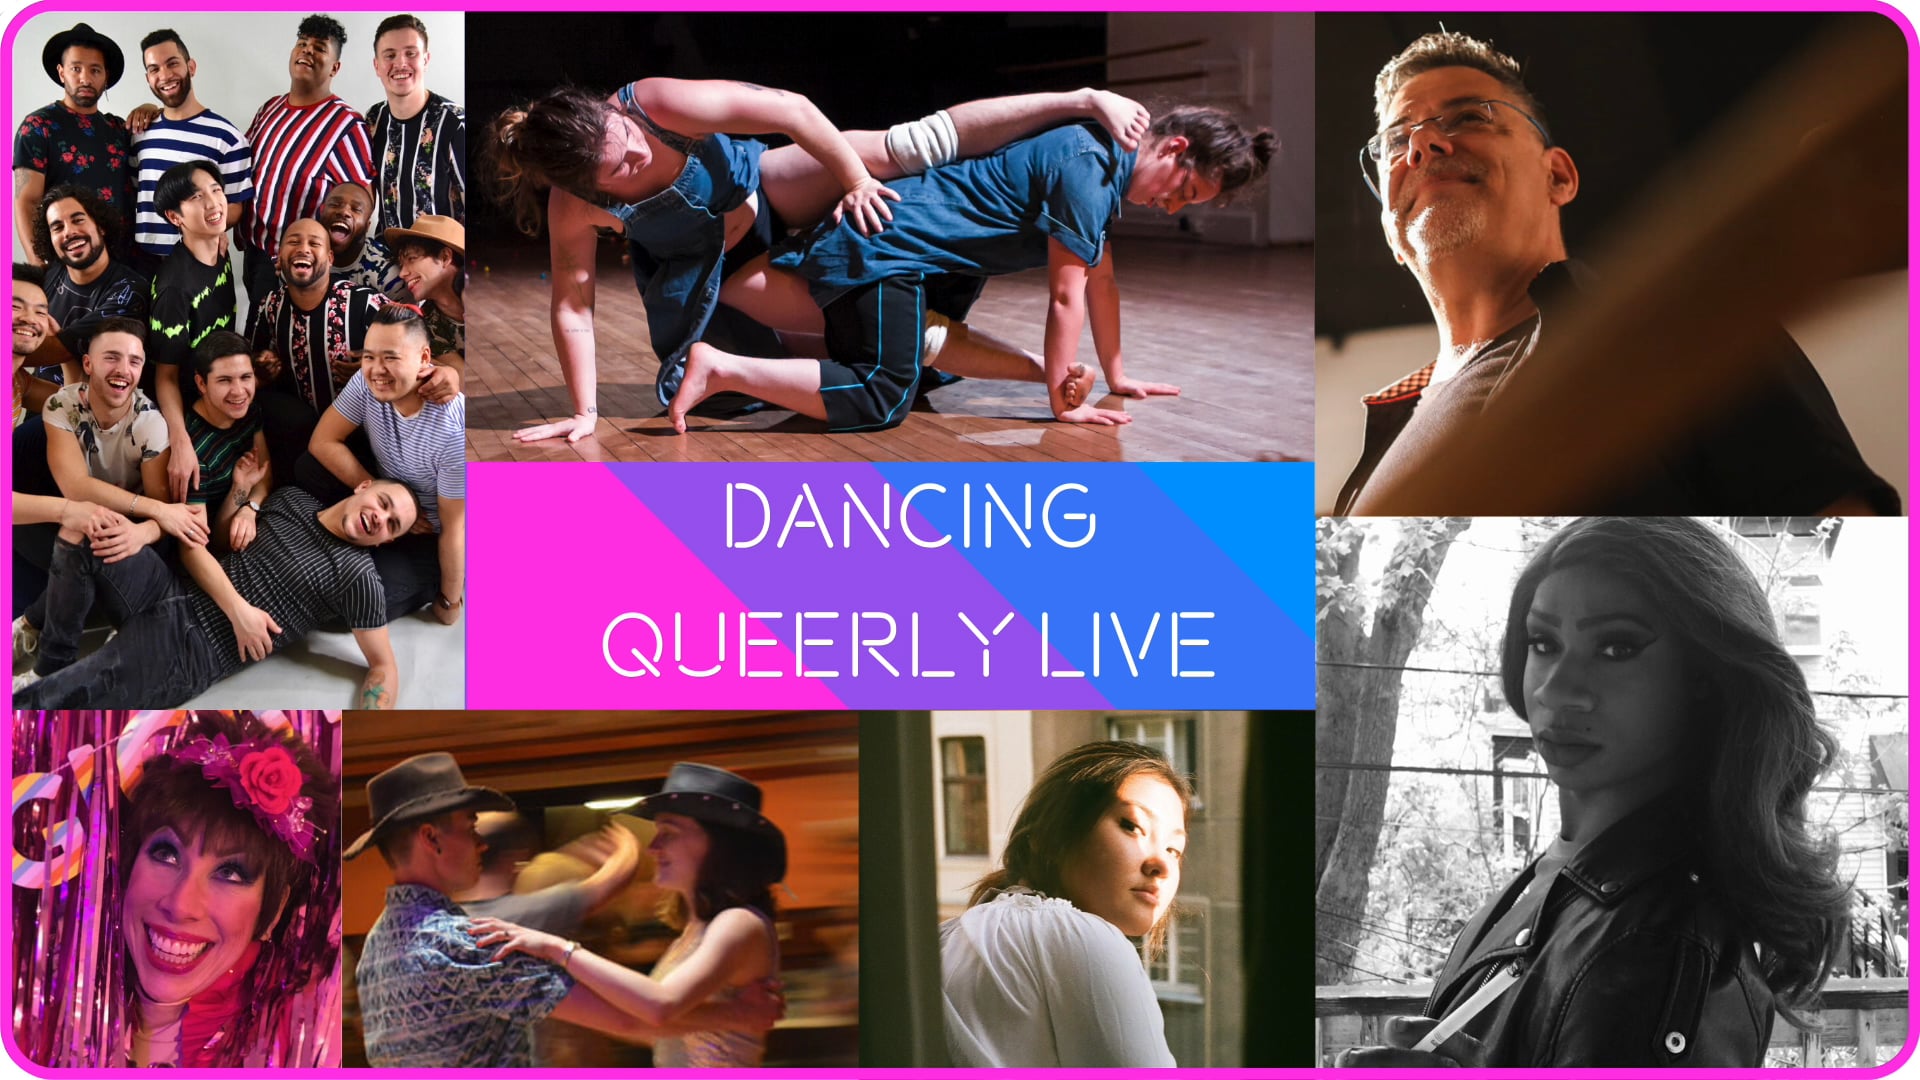 Dancing Queerly Live 2020 Highlight Reel